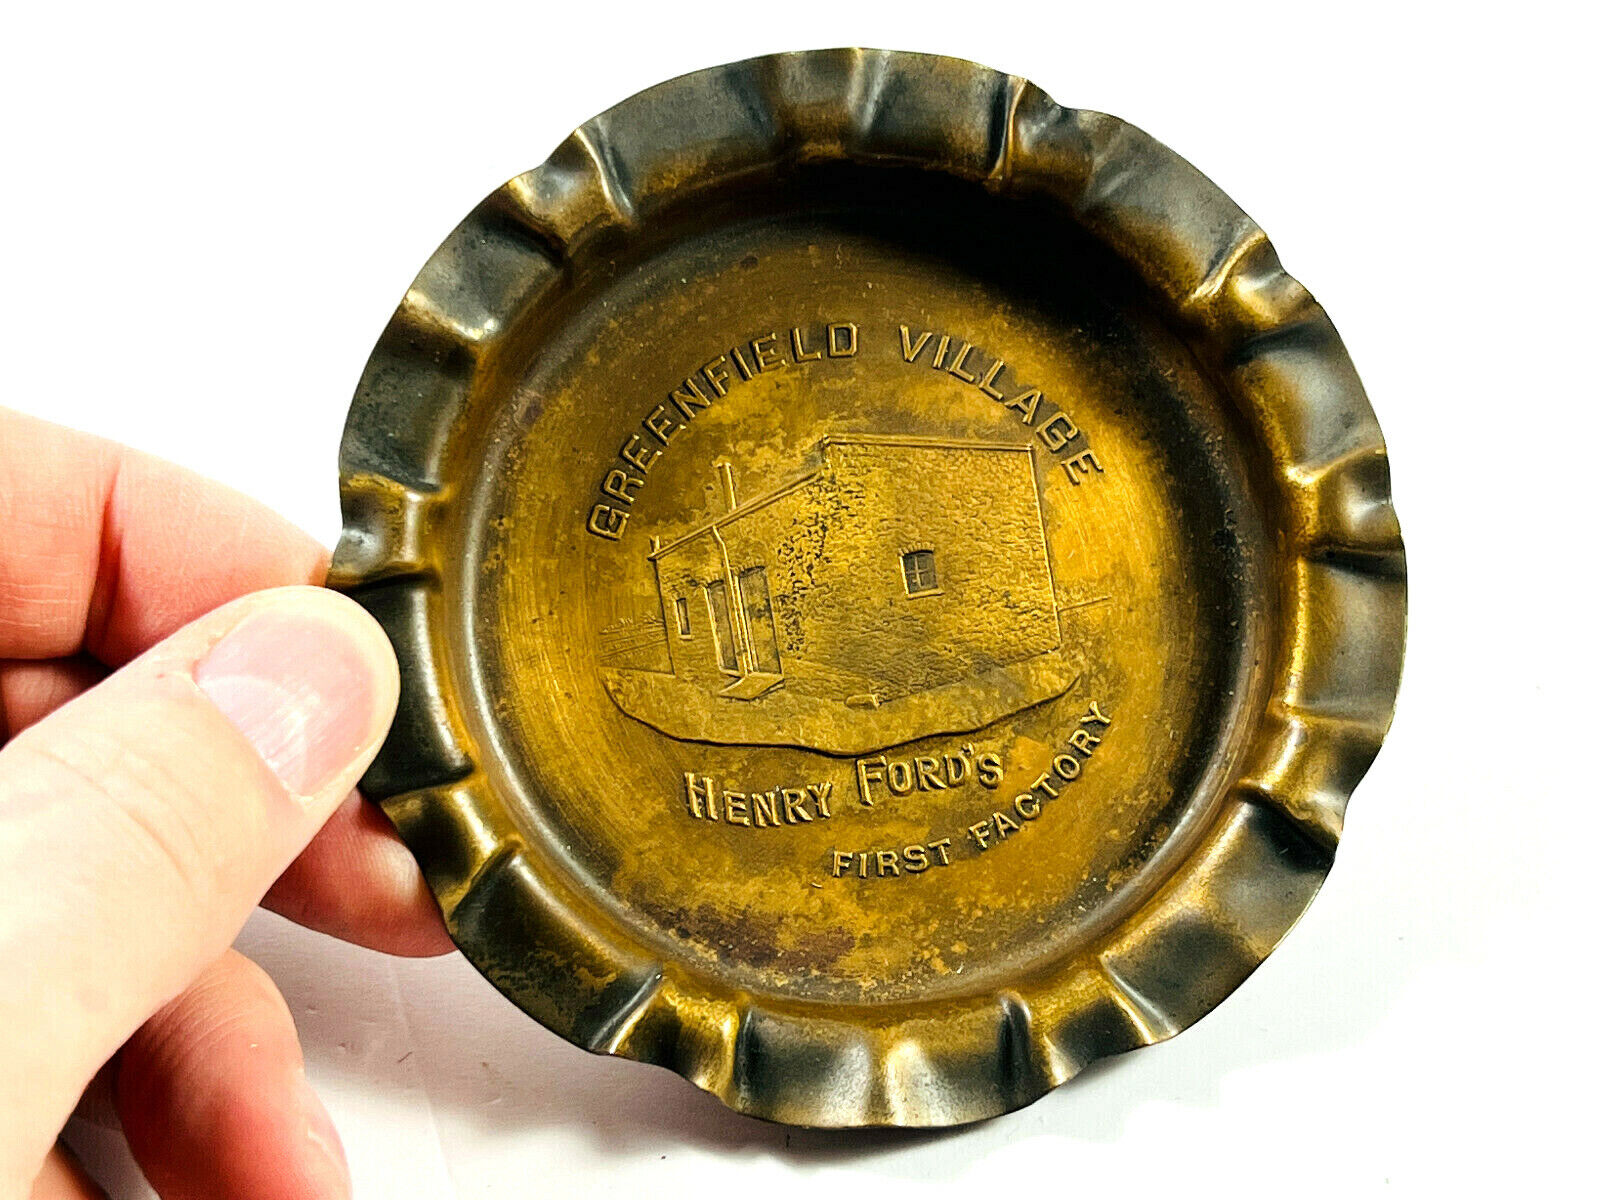 vtg Greenfield Village Henry Ford's First Factory Brass Ashtray Dearborn, MI